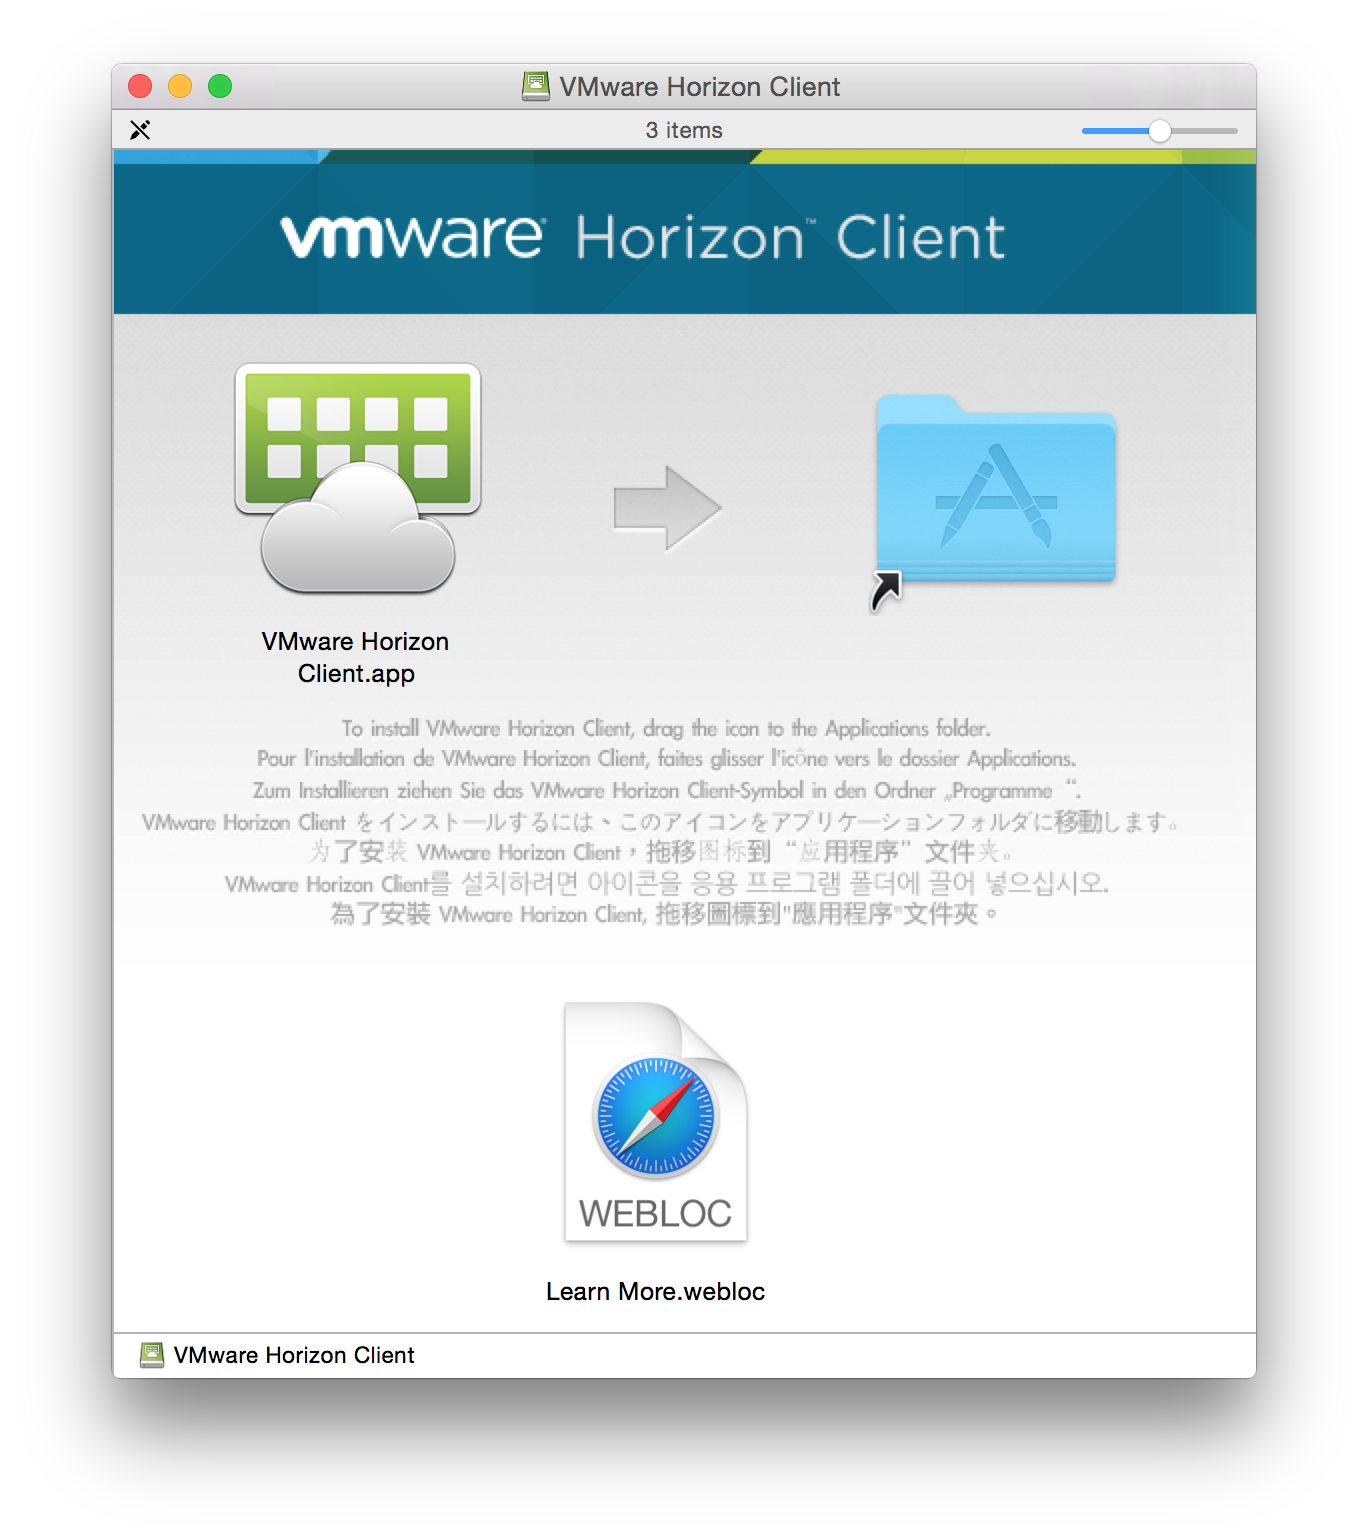 vmware horizon client for windows installation and setup guide